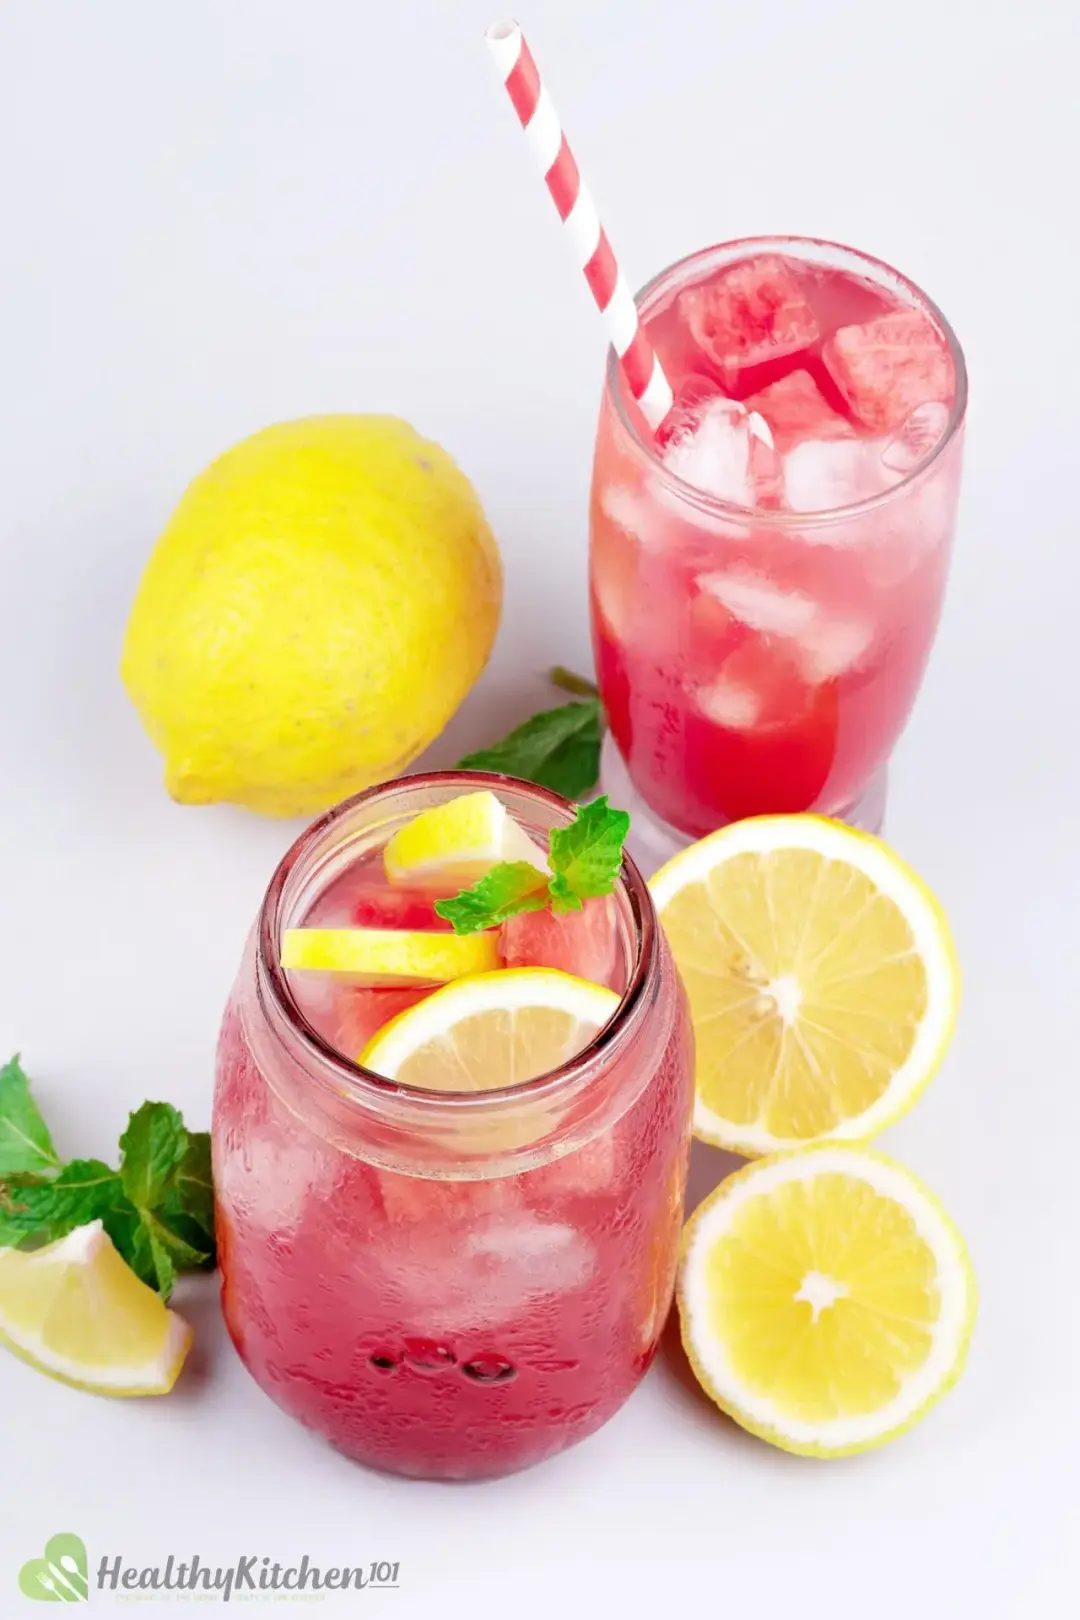 two glasses of watermelon juice and lemon with a pink-striped straw and a jar of watermelon juice and lemon topped with three lemon slices and mint leaves